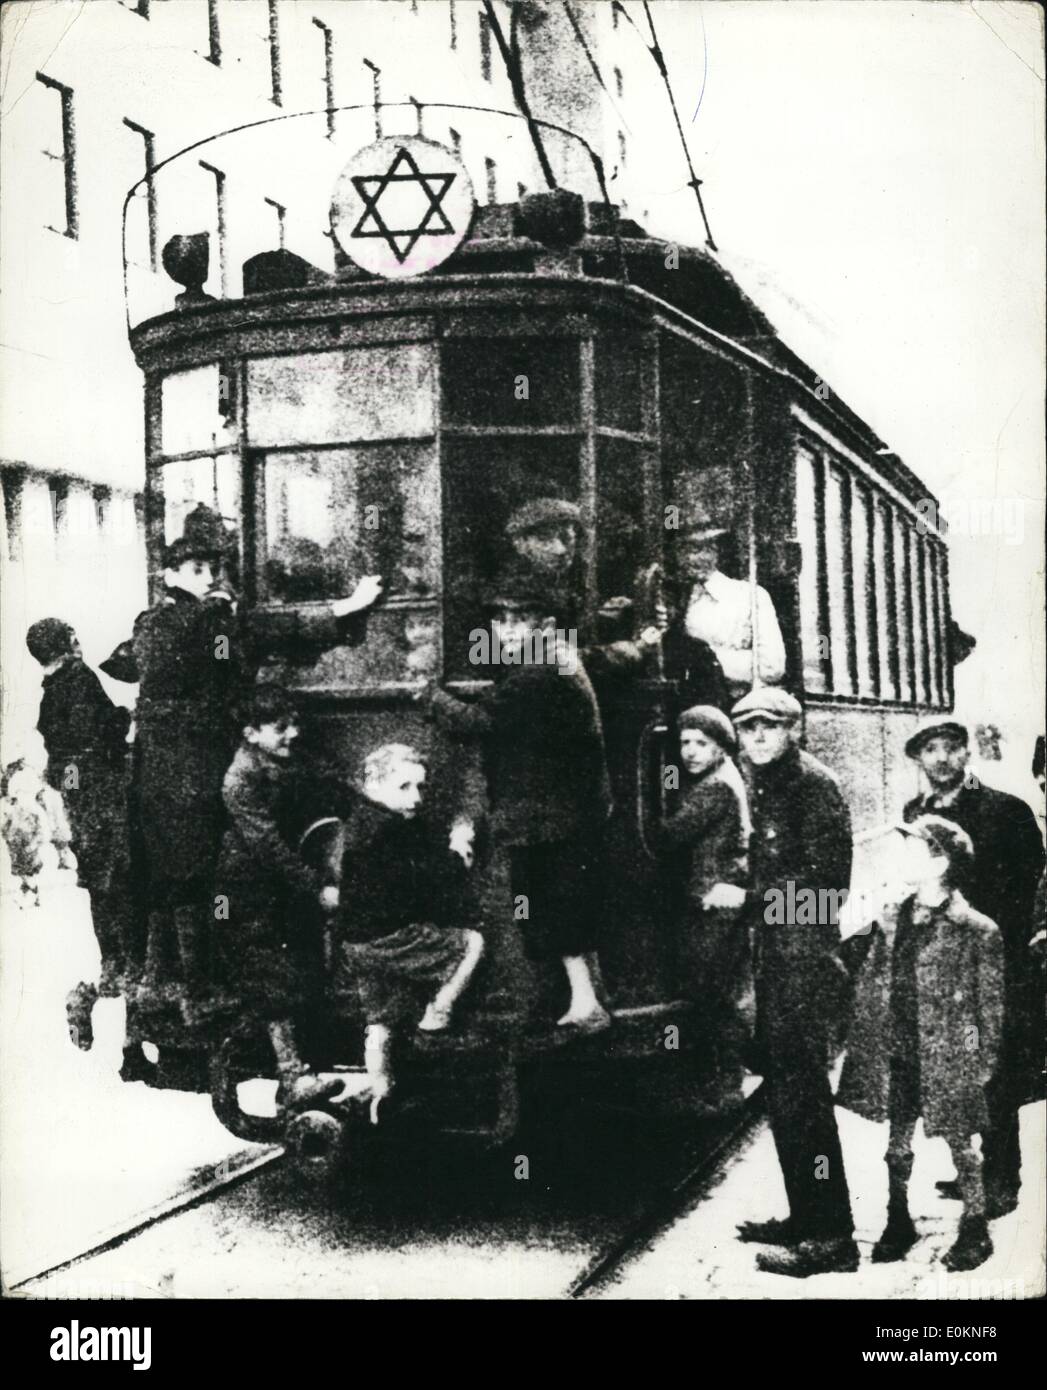 Jan. 1, 1930 - Ghetto Life In Warsaw - When Ghetto Still Existed: Warsaw, Poland. The War Of David Attached To The Top Of This Tram-Car Indicates It Is In Uses For Residents's Of Warsaw's Ghetto To Which Jews From Every Nazi Occupied Country Of Europe Has Been Sent. The Picture Was Publish In A Leading German Magazine And In Reache, London Via Neutral Channels. But Since This Picture Was Taken, The Warsaw Ghetto Has Ceased To Exist, Following The Ruthlessly Carried Out Plan Of Mass Slaught And The Total Population Of The Ghetto. (exact date unknown) Stock Photo